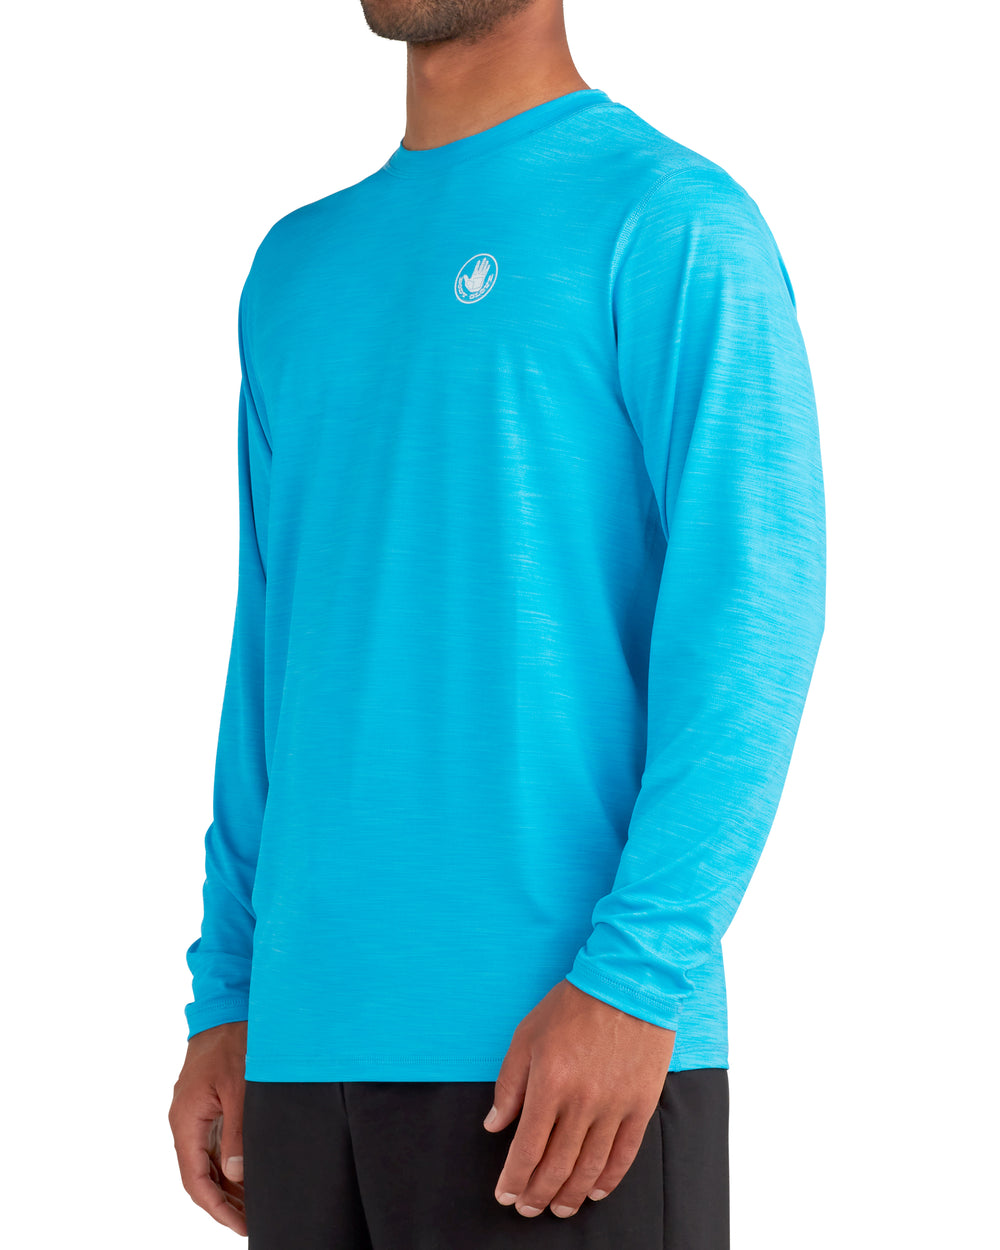 Seatec Outfitters Fly Long Sleeve Performance Shirt - UPF 50+